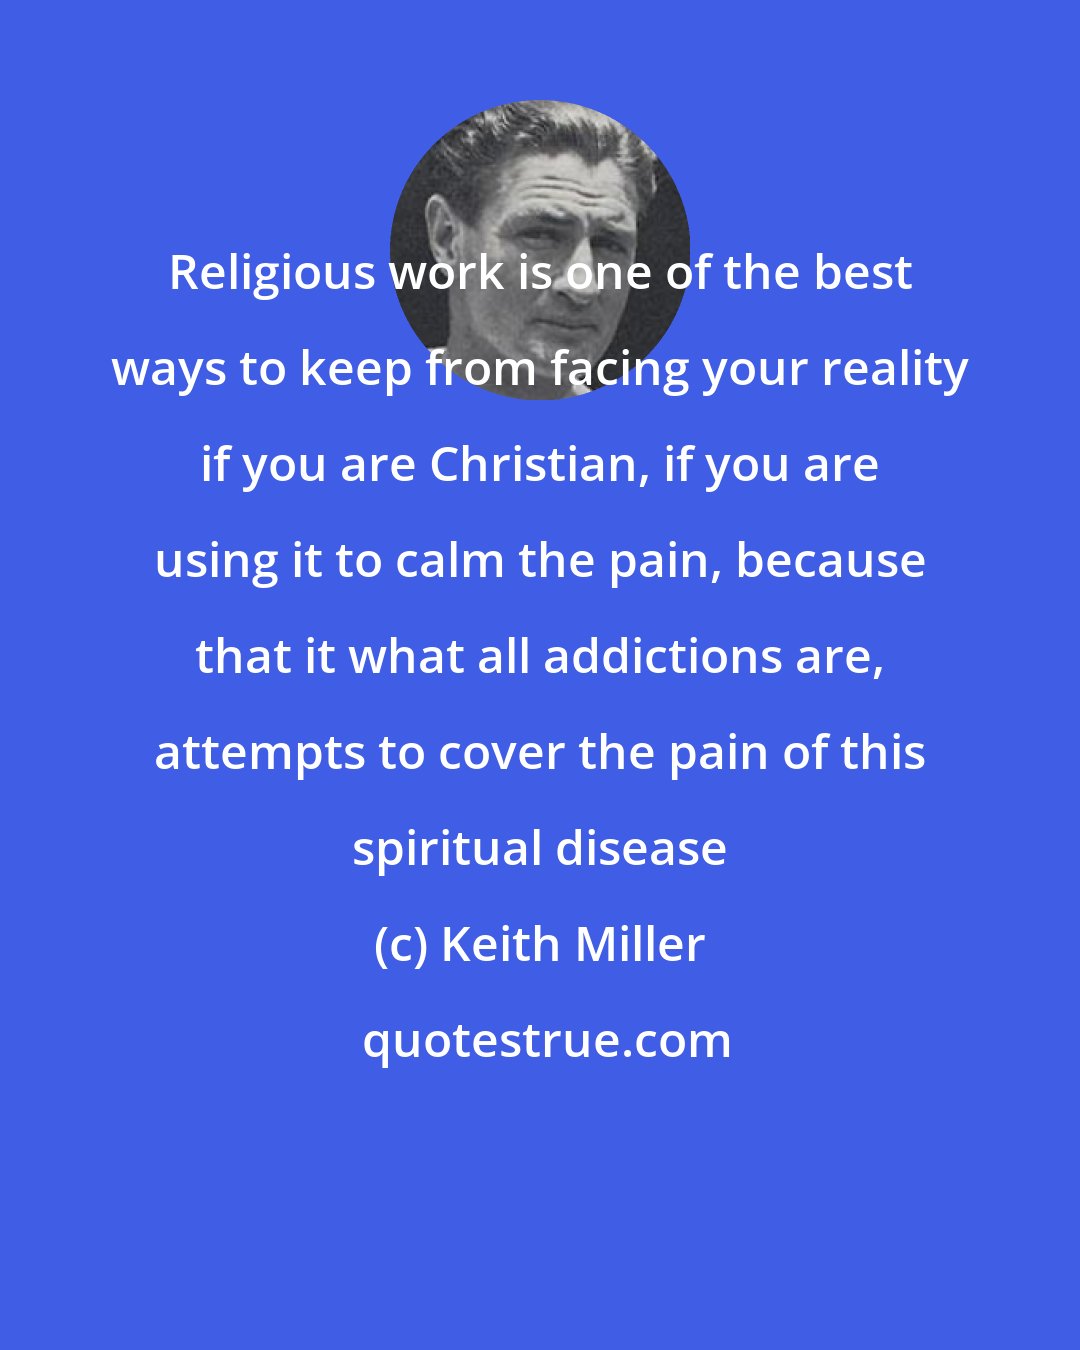 Keith Miller: Religious work is one of the best ways to keep from facing your reality if you are Christian, if you are using it to calm the pain, because that it what all addictions are, attempts to cover the pain of this spiritual disease